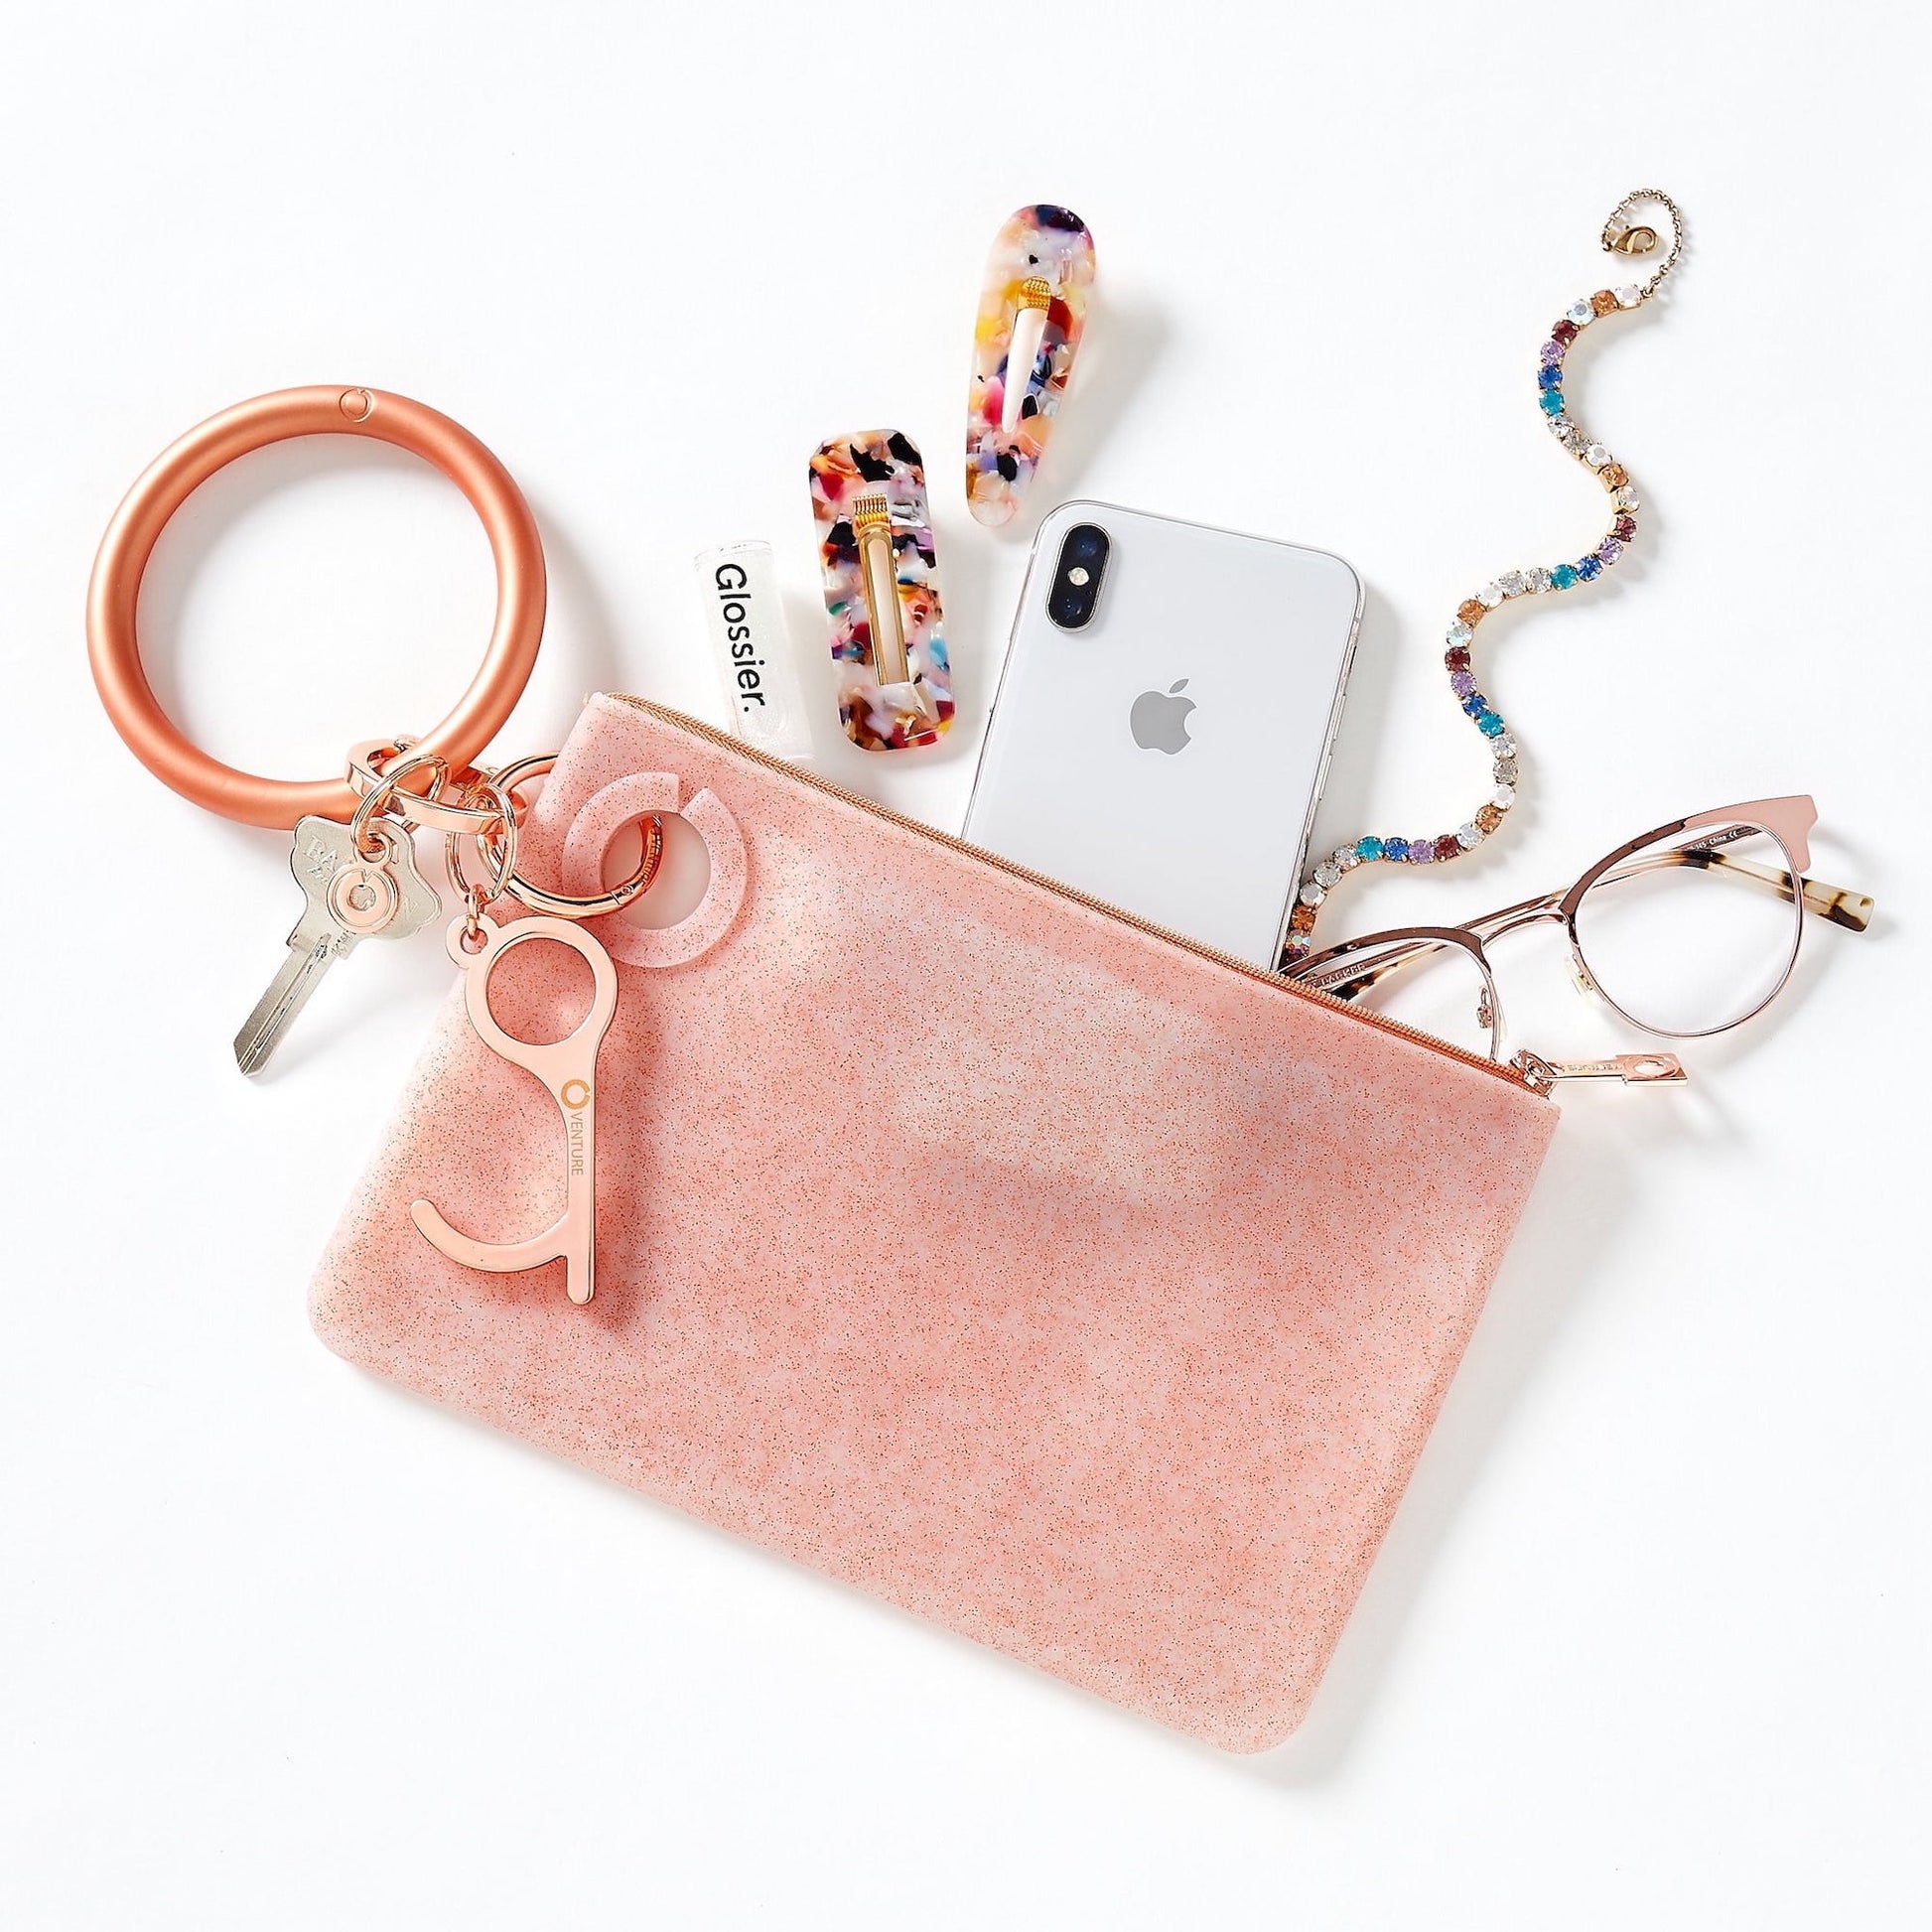 Oventure Large silicone pouch holding phone, glasses, lip gloss and hair clips.  This  wallet is attached to a keychain to become a wallet wristlet.